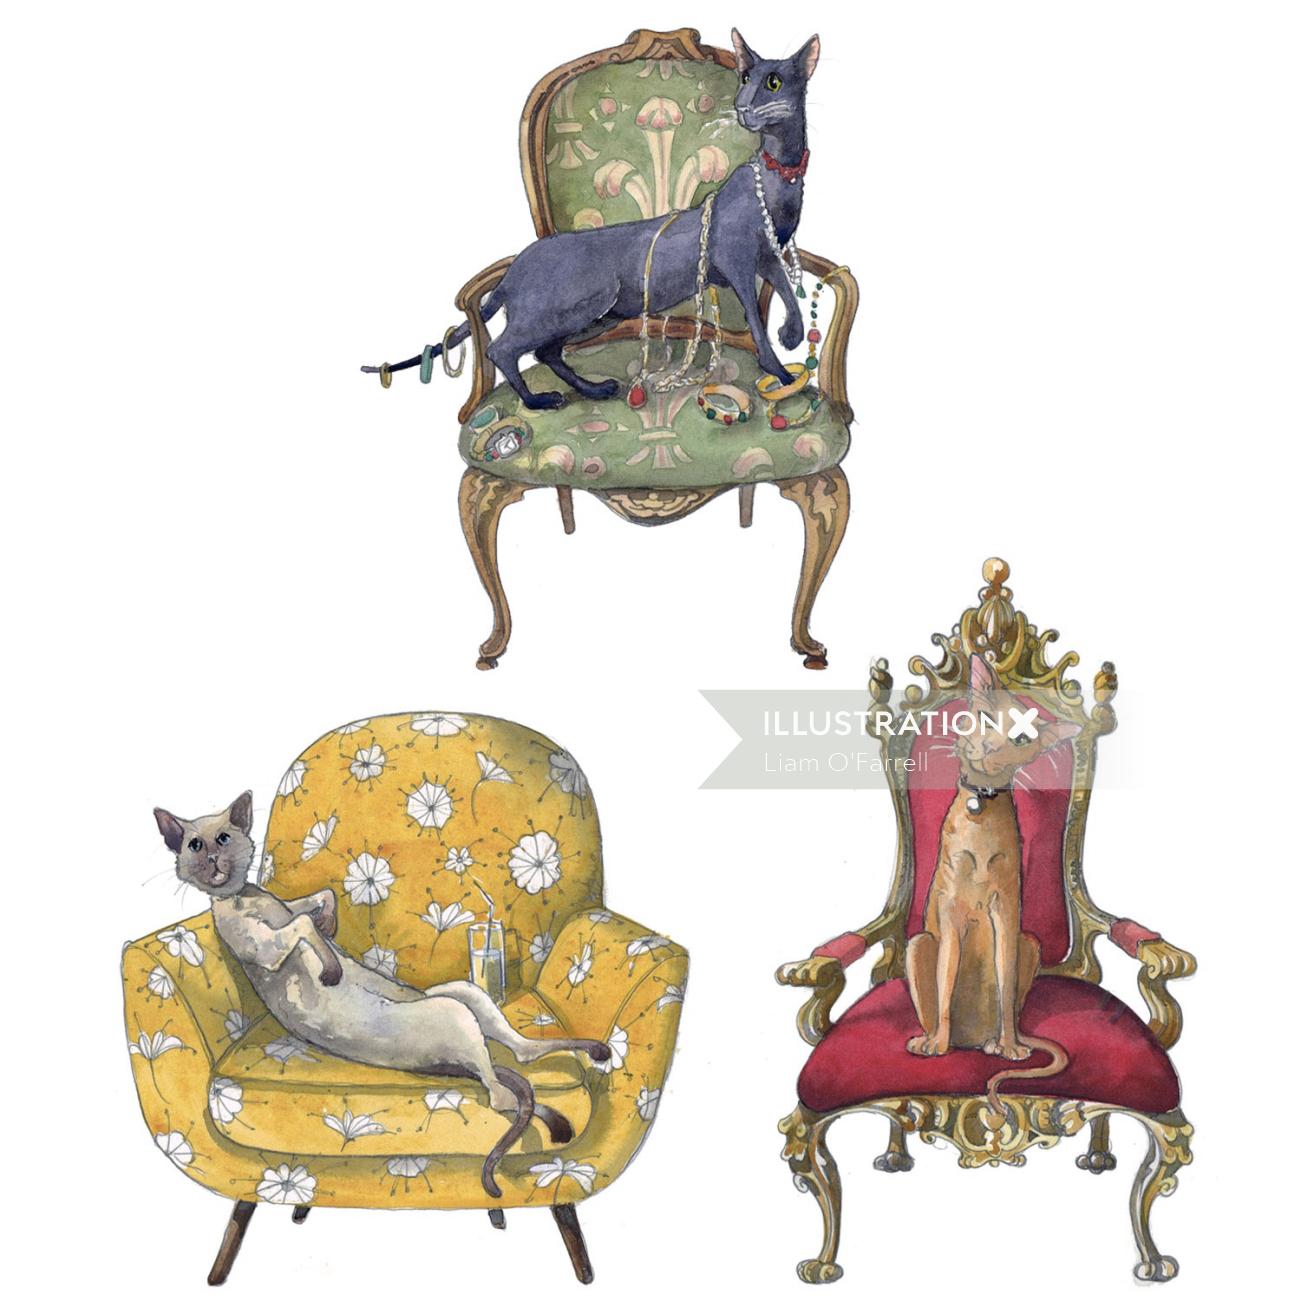 Illustration of Cats in Chairs